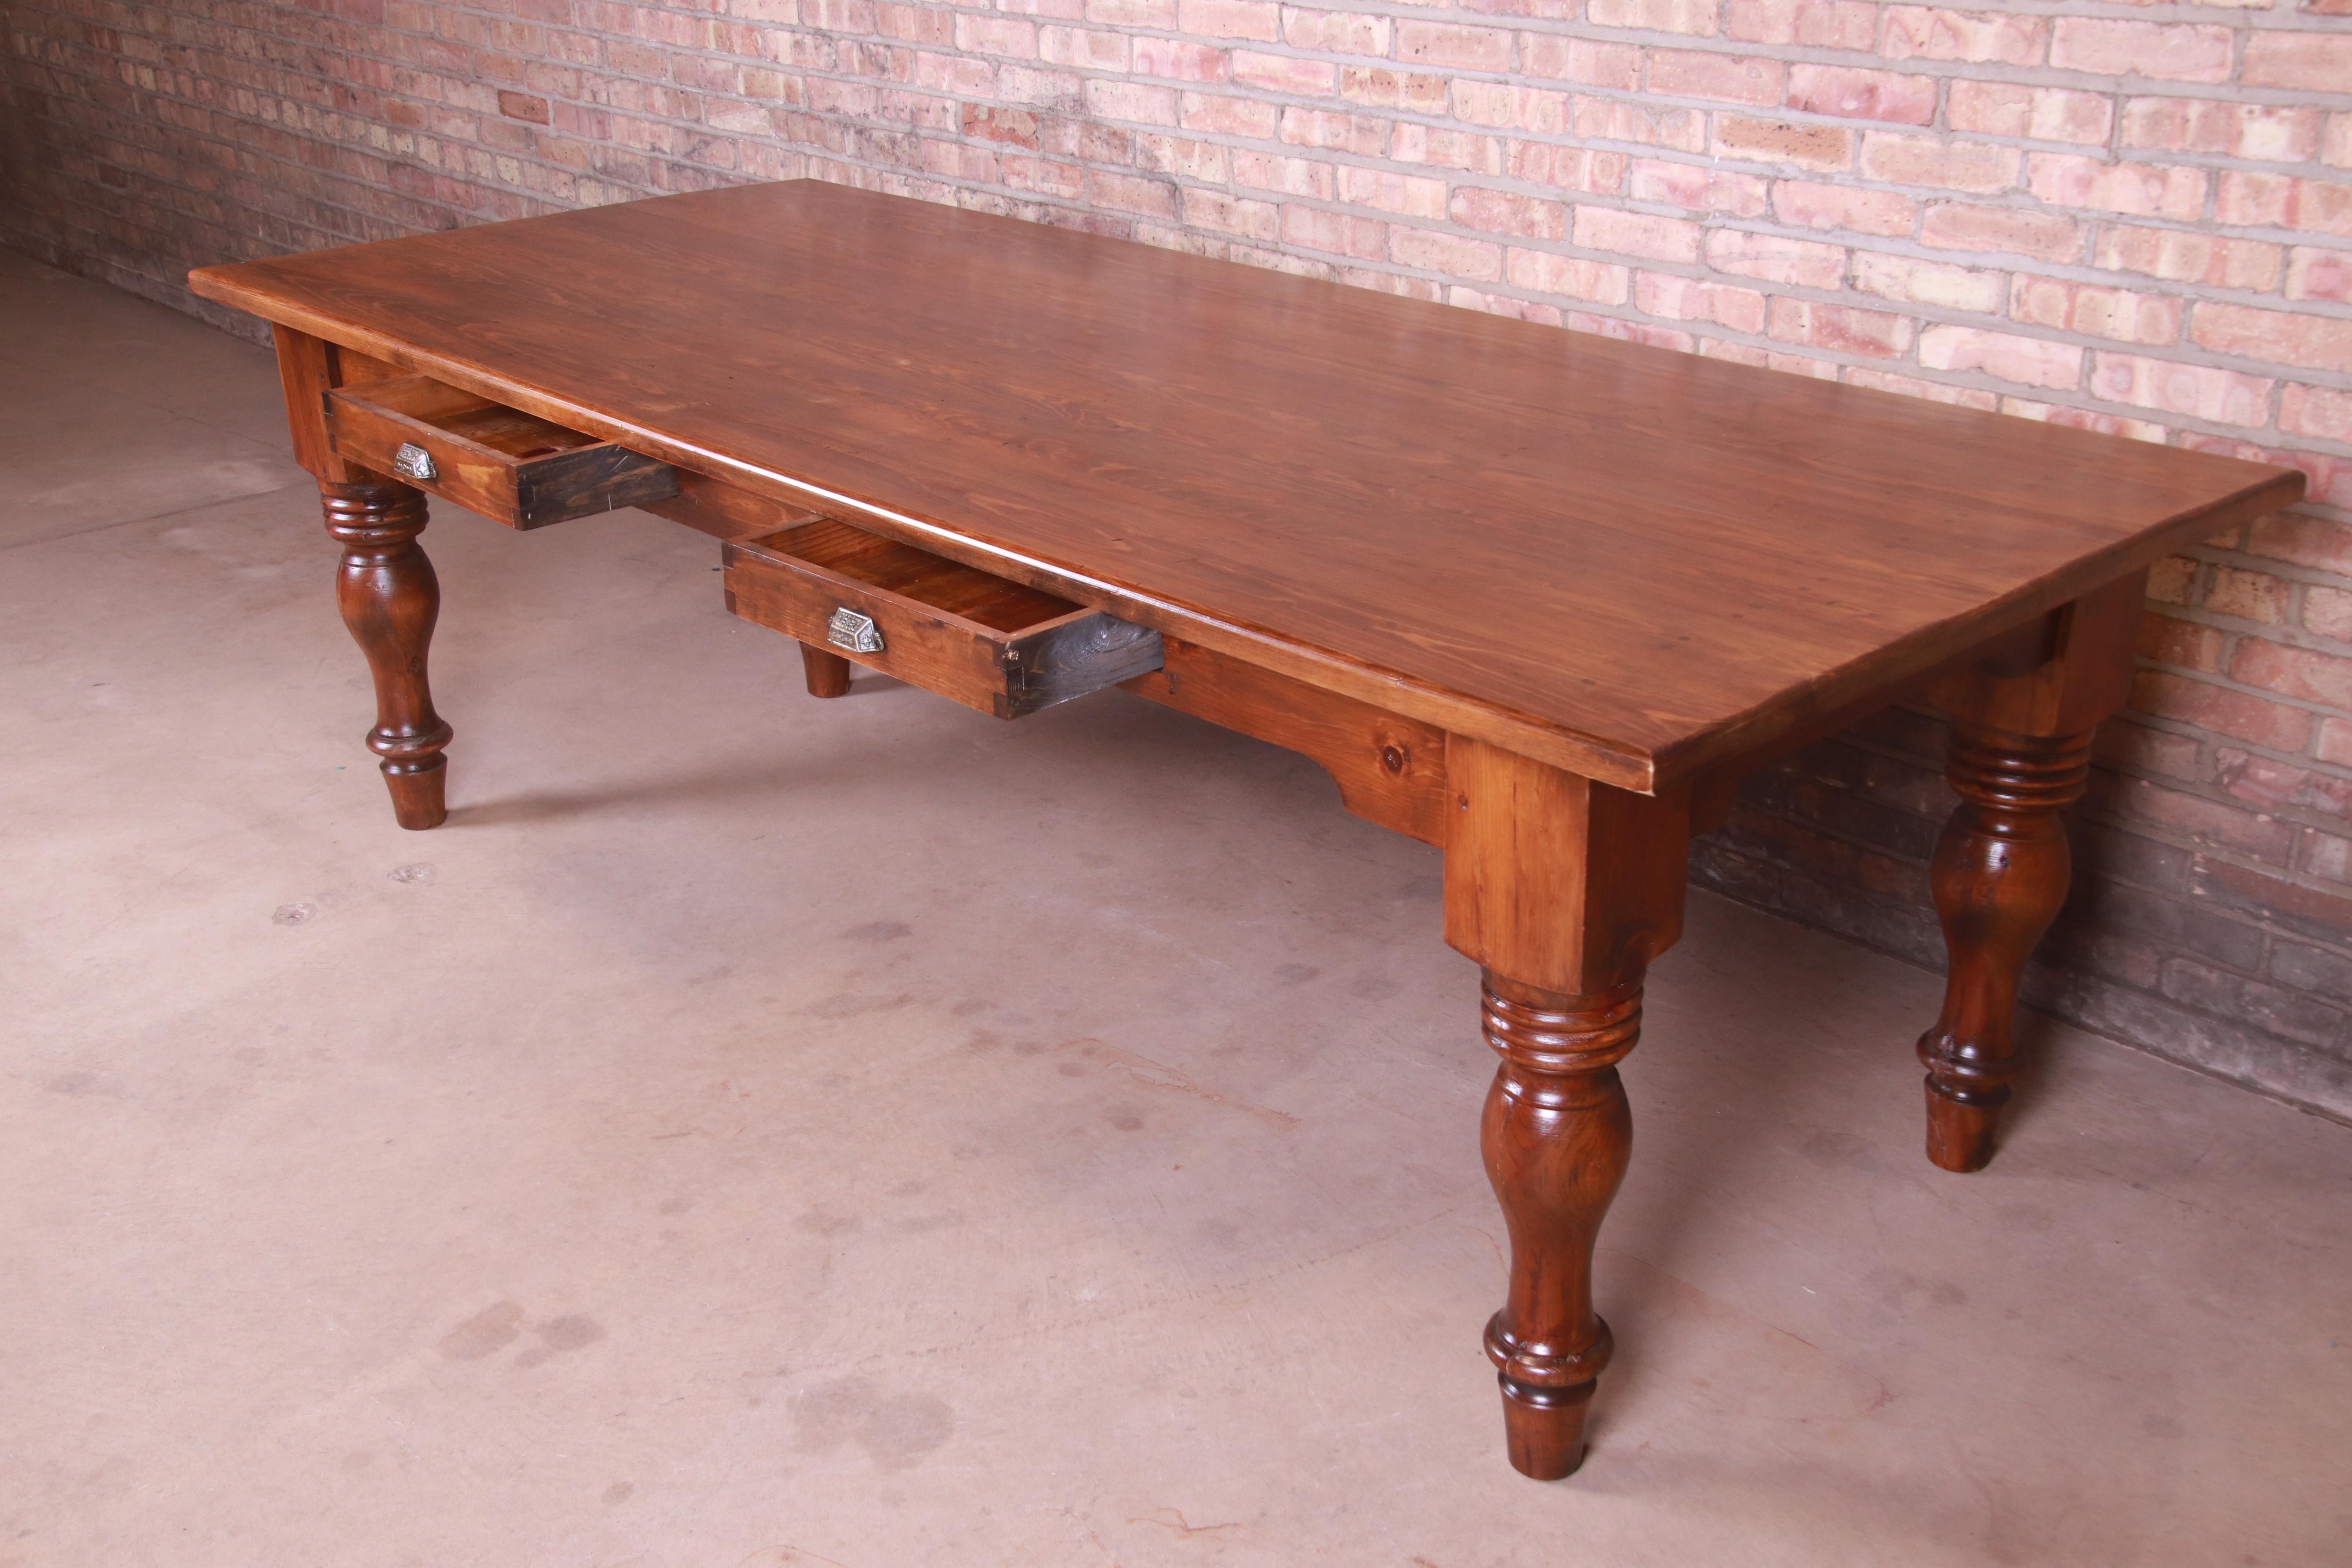 19th Century Rustic Pine American Harvest Farm Table with Drawers 6